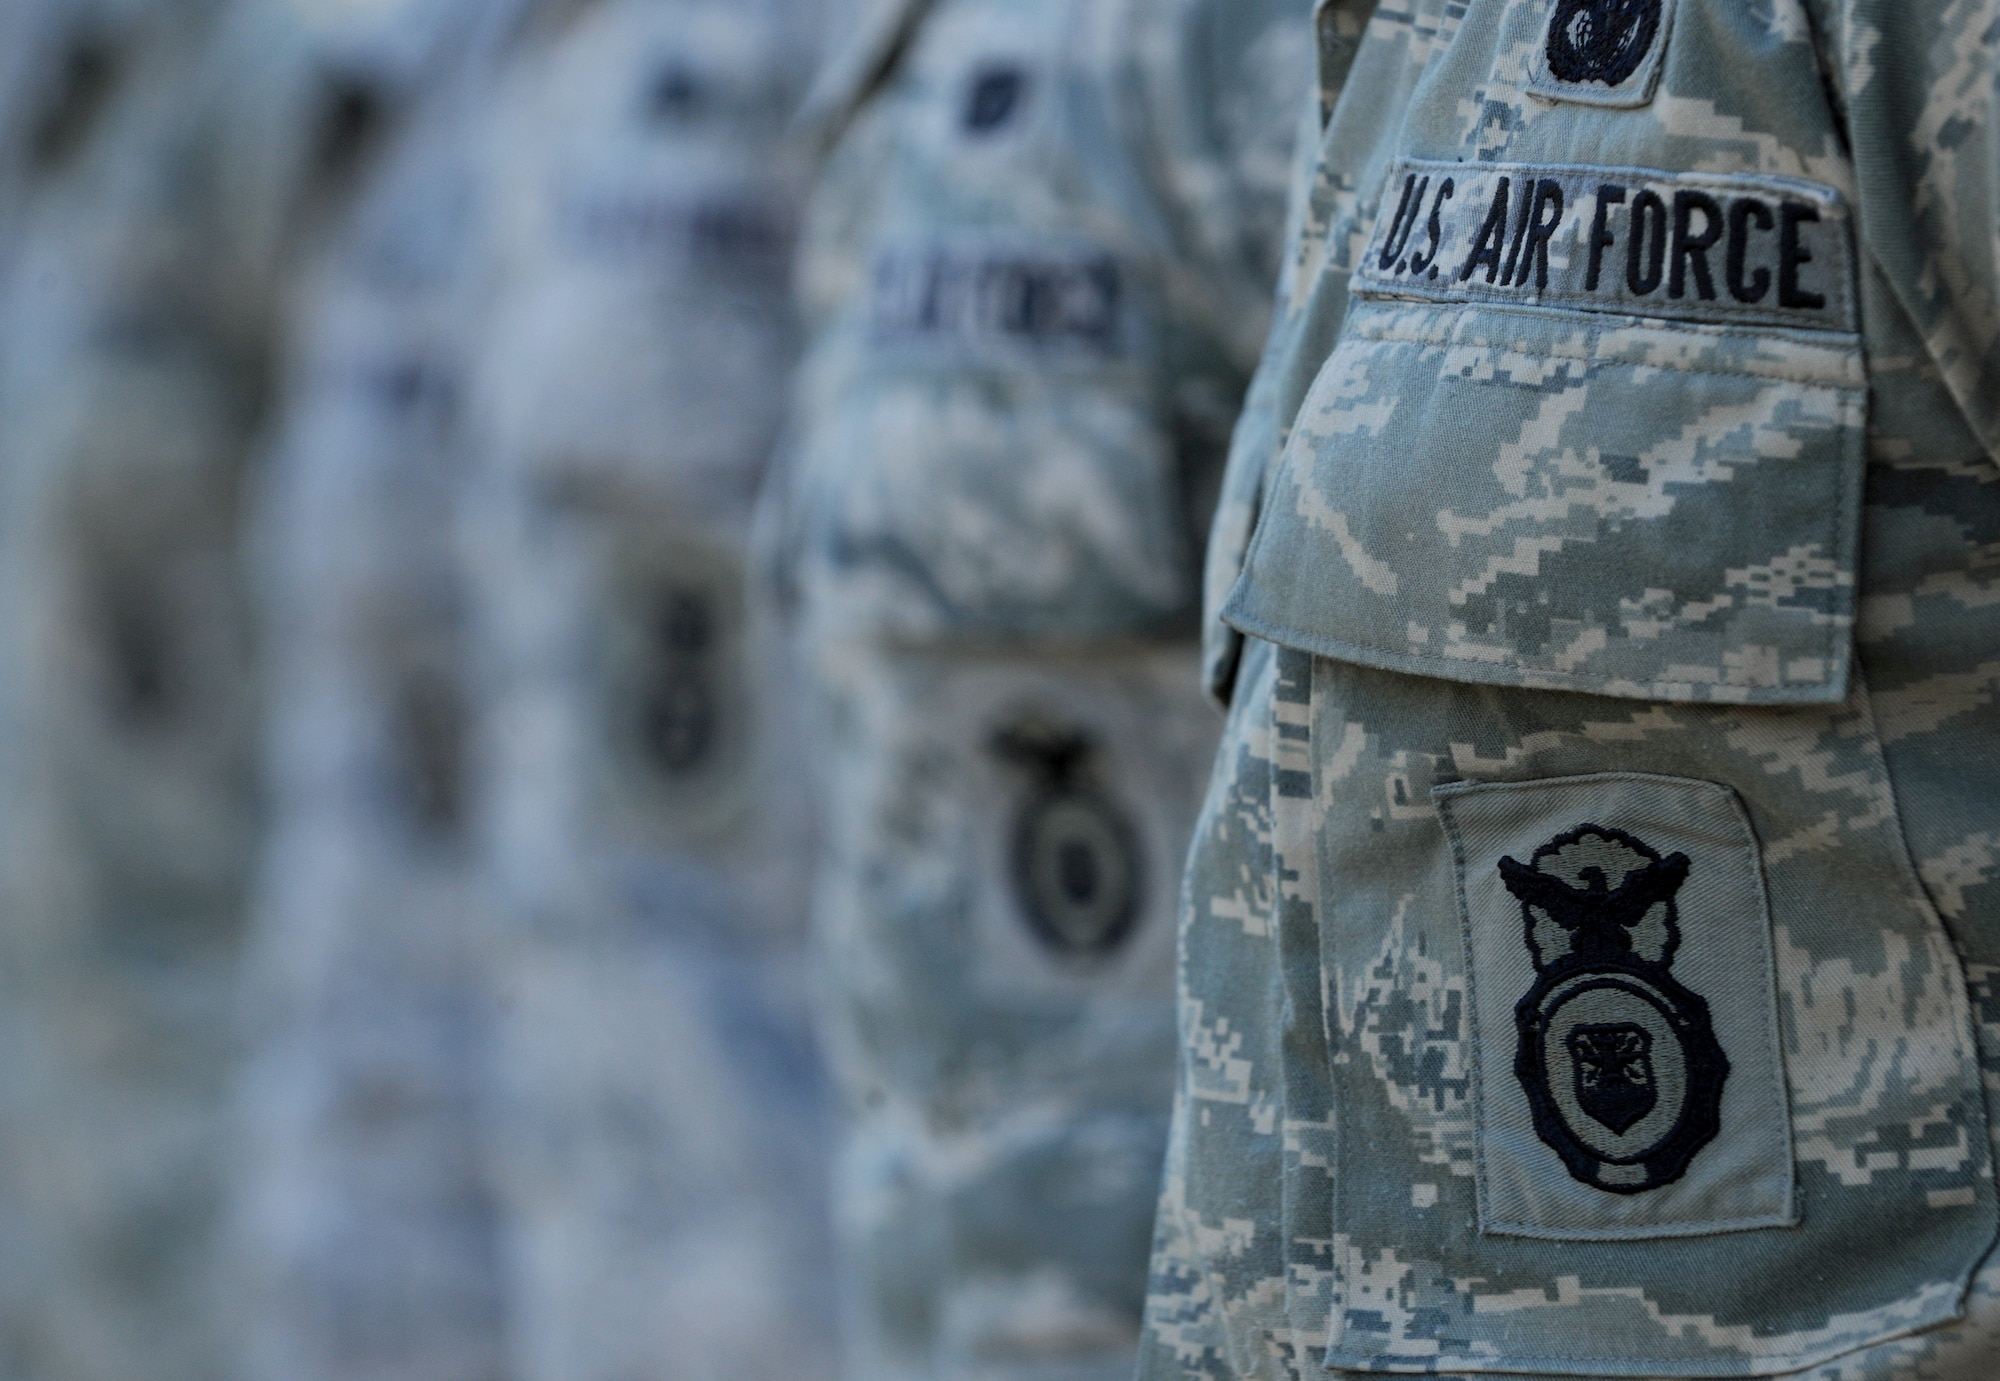 MOODY AIR FORCE BASE, Ga. -- Members of the 820th Security Forces Group stand at parade rest during a redesignation ceremony here Oct. 7. As of Sept. 30, the new name for the group is the 820th Base Defense Group.  (U.S. Air Force photo/Airman 1st Class Benjamin Wiseman)

